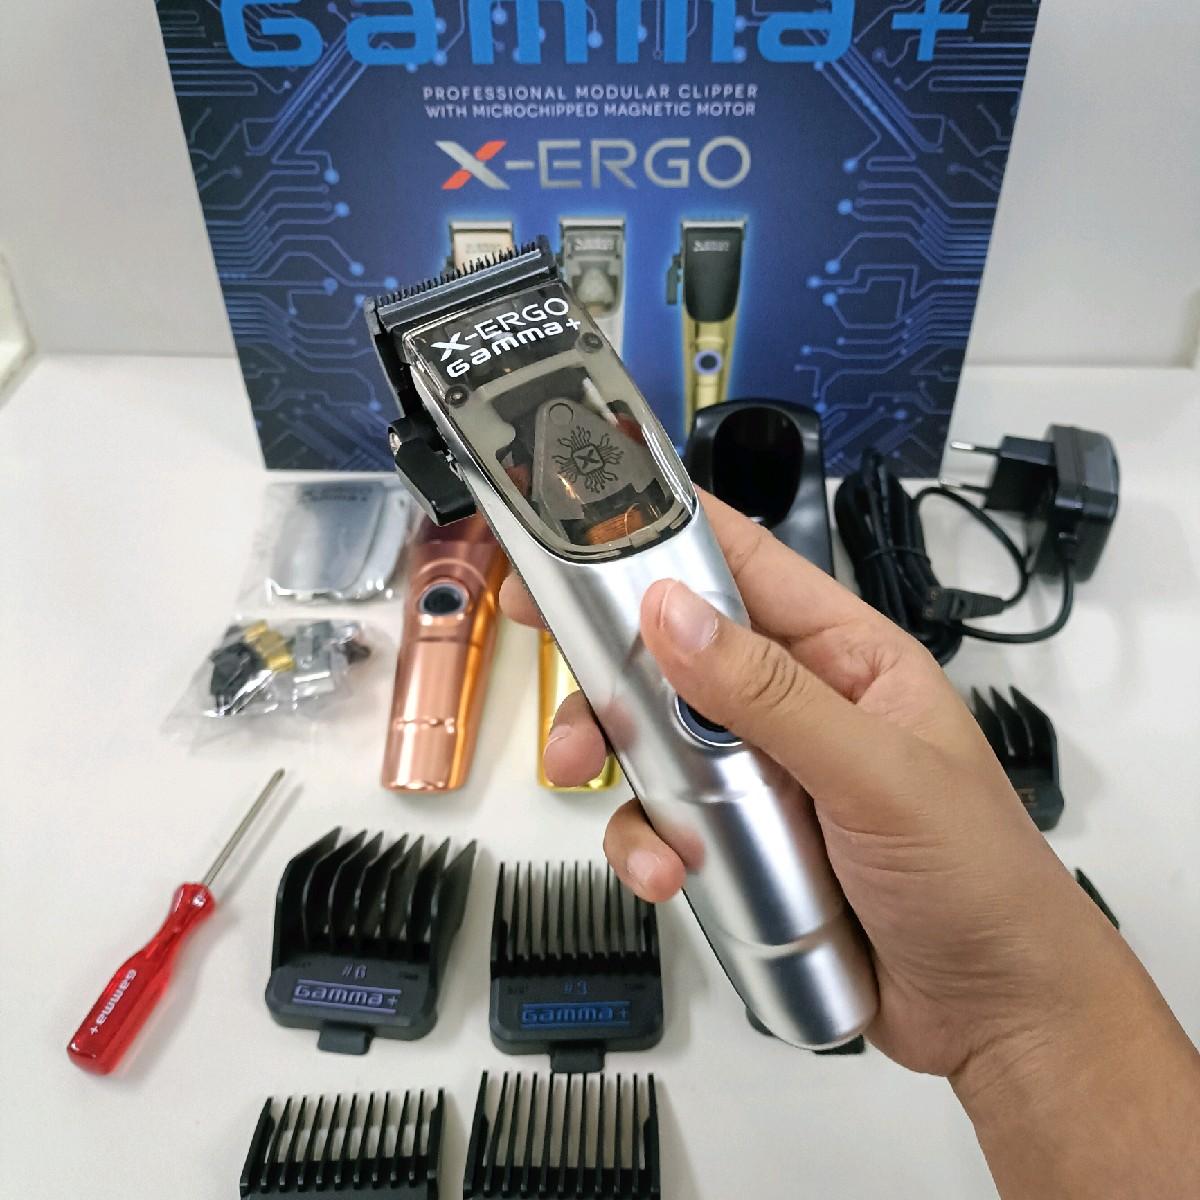 GAMMA  Ergo Professional Microchipped Magnetic Motor Clipper with Customizable Lids (Chrome, Rose Gold, Gold)